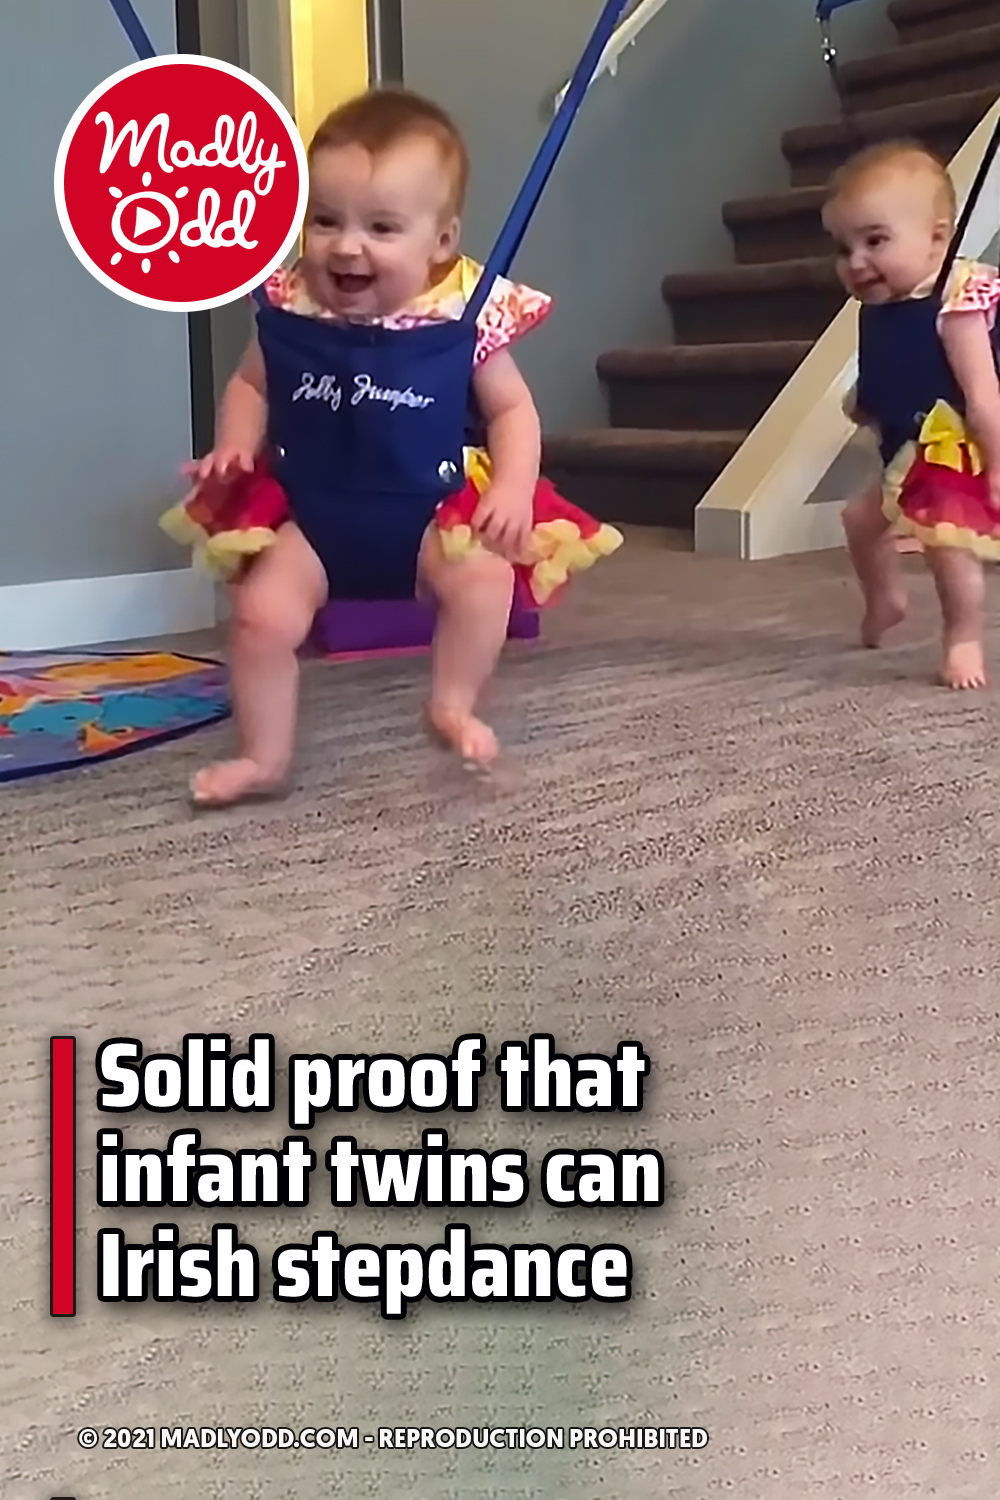 Solid proof that infant twins can Irish stepdance